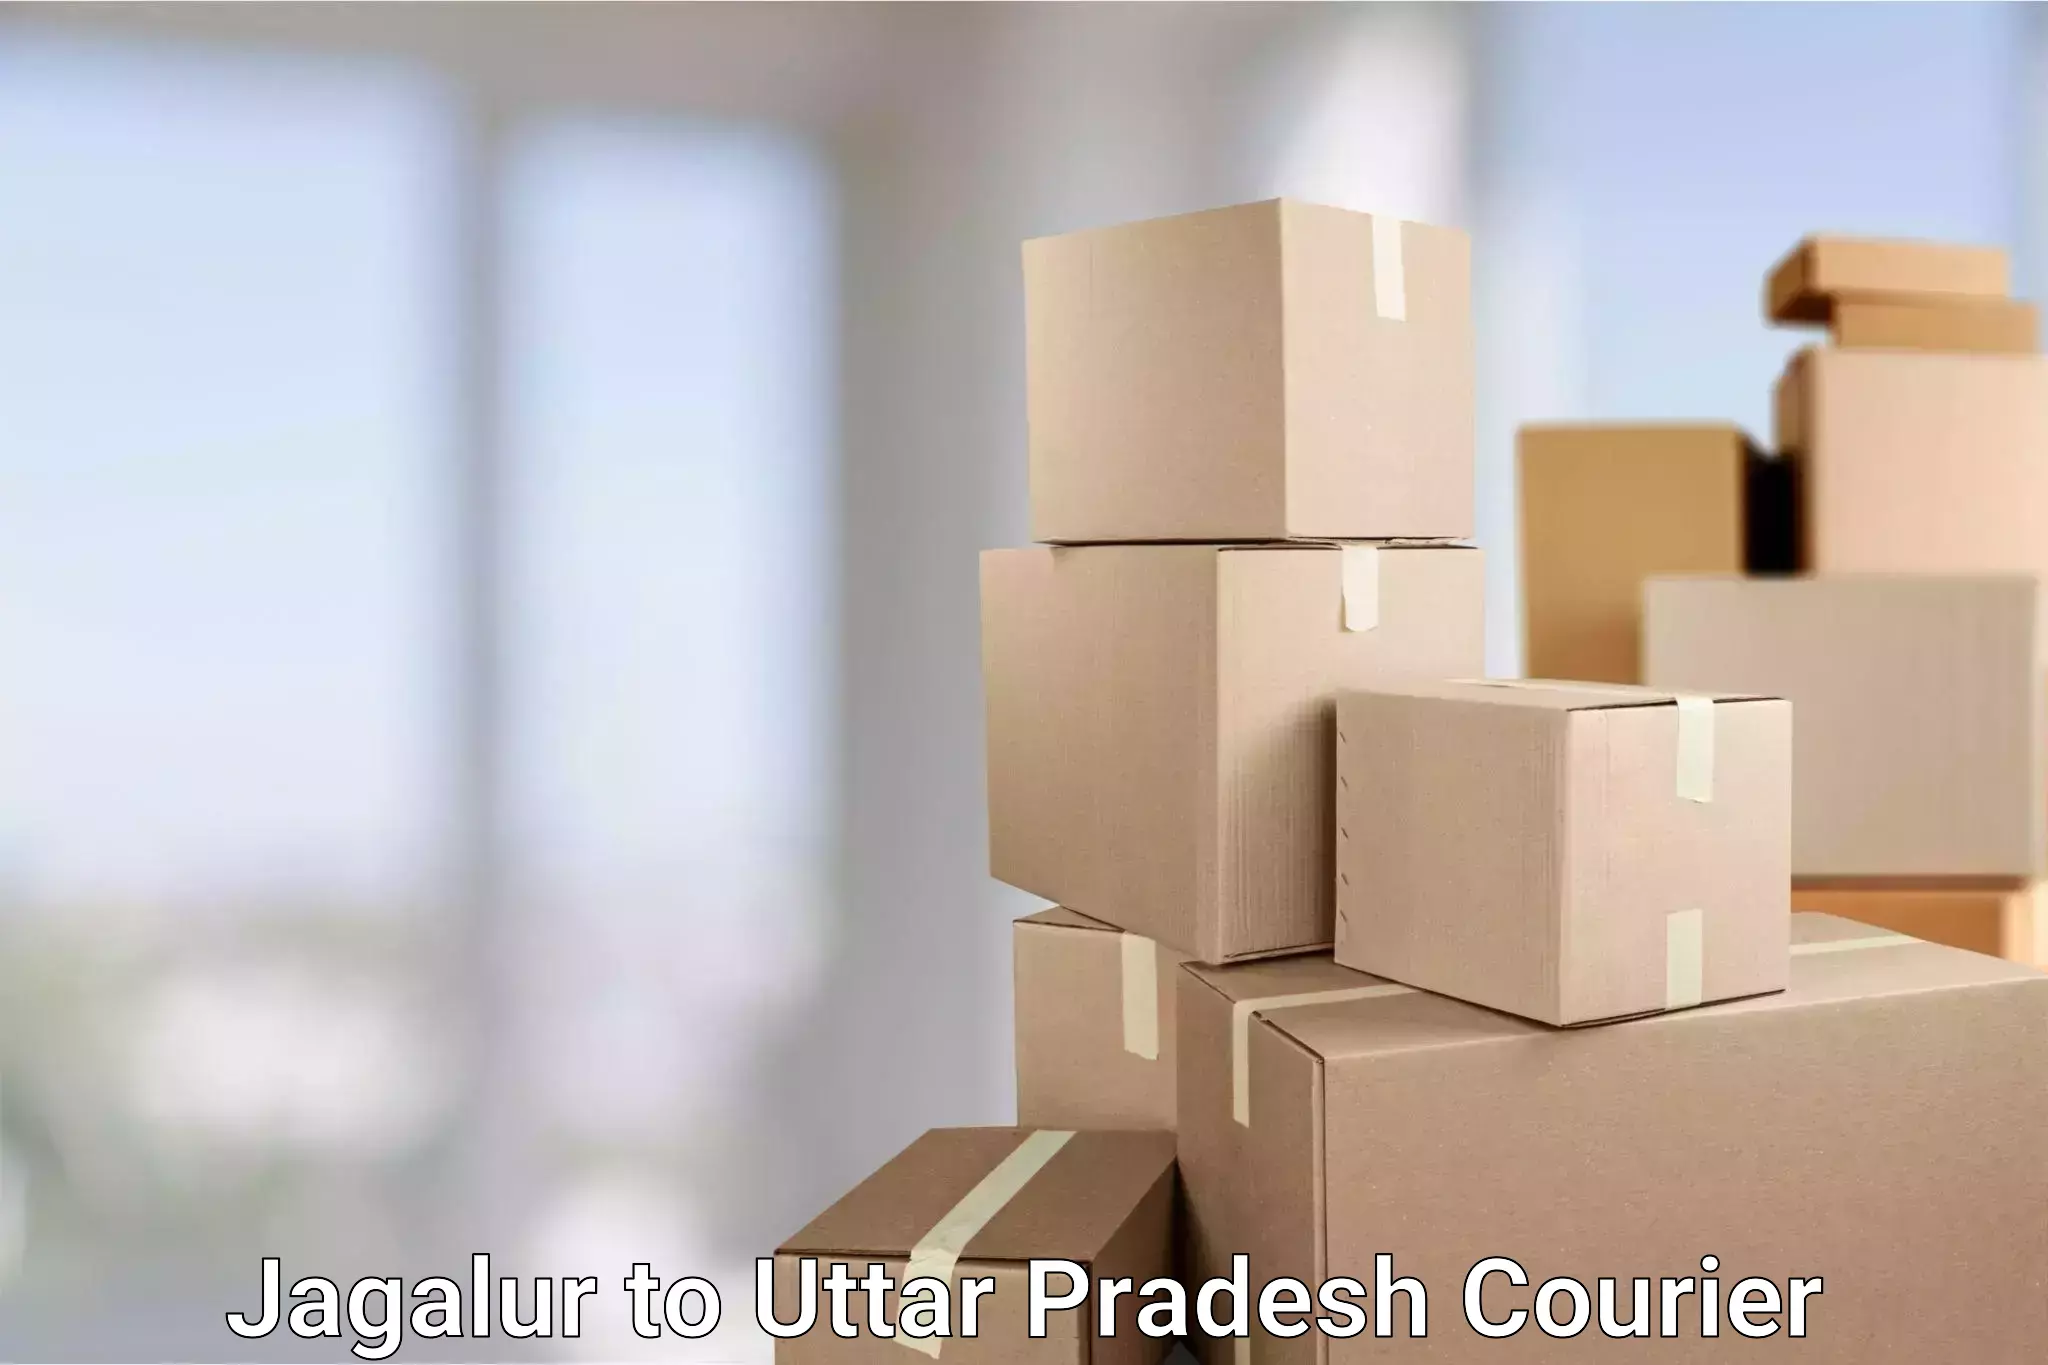 Courier service booking Jagalur to Allahabad